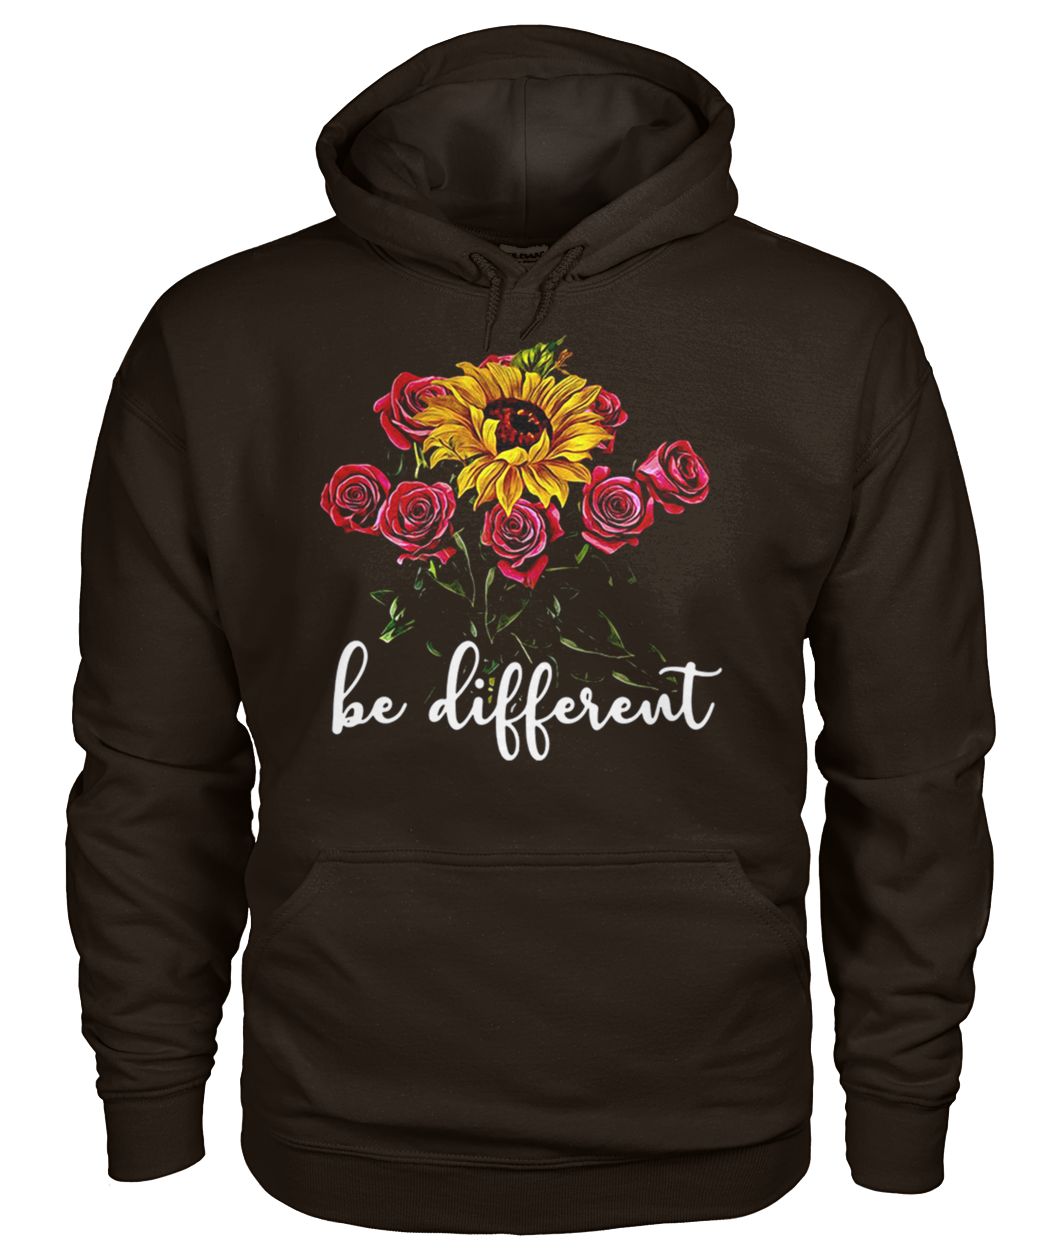 Sunflower and roses be different gildan hoodie